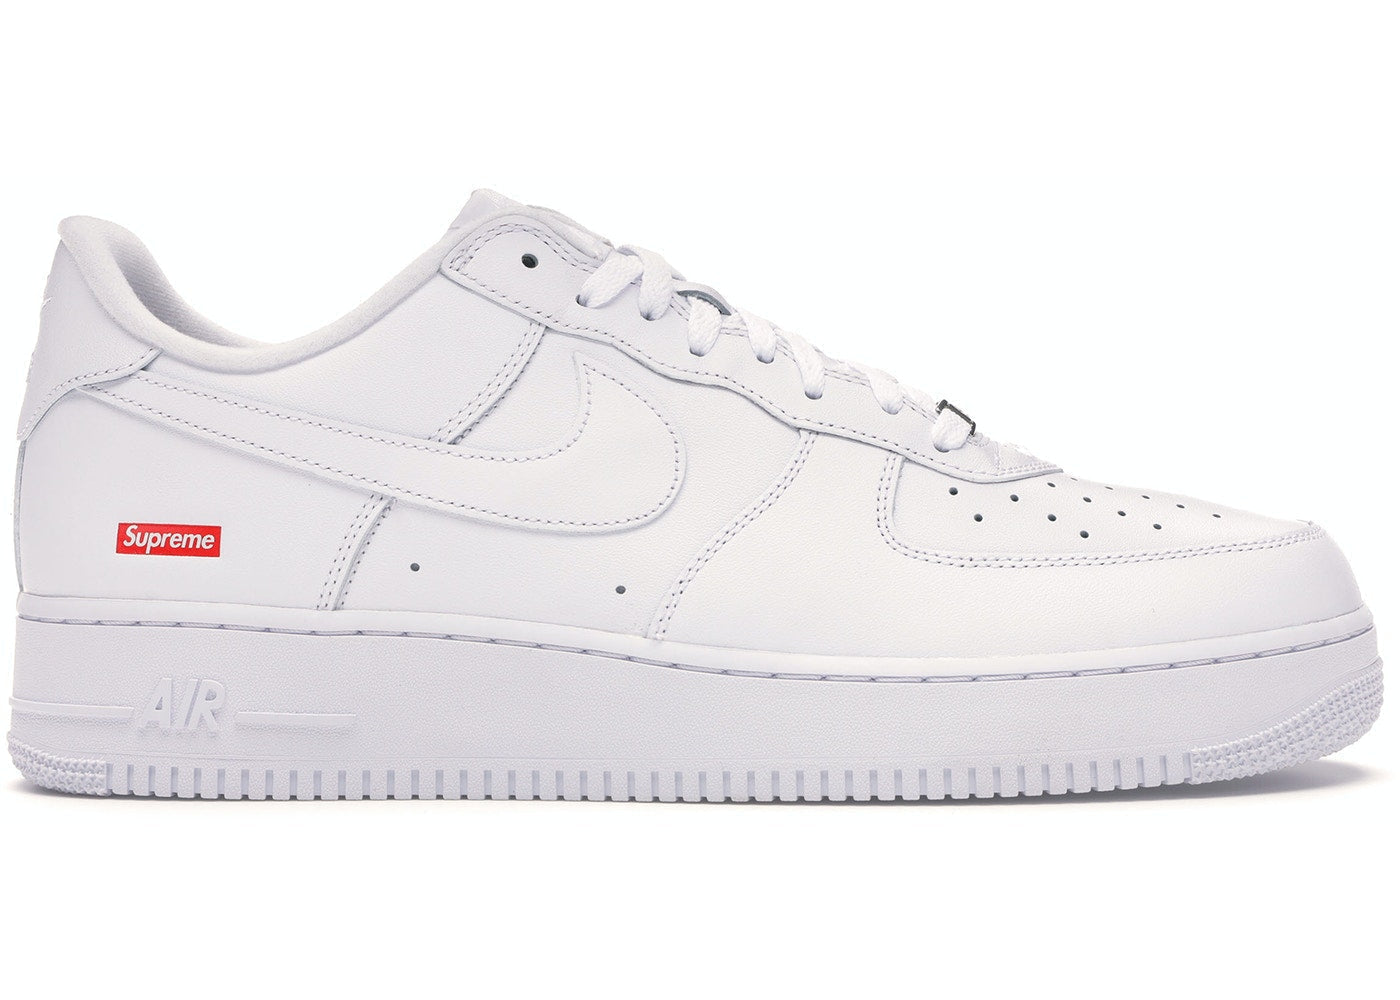 Nike Air Force 1 Low Supreme White – Sole Priorities